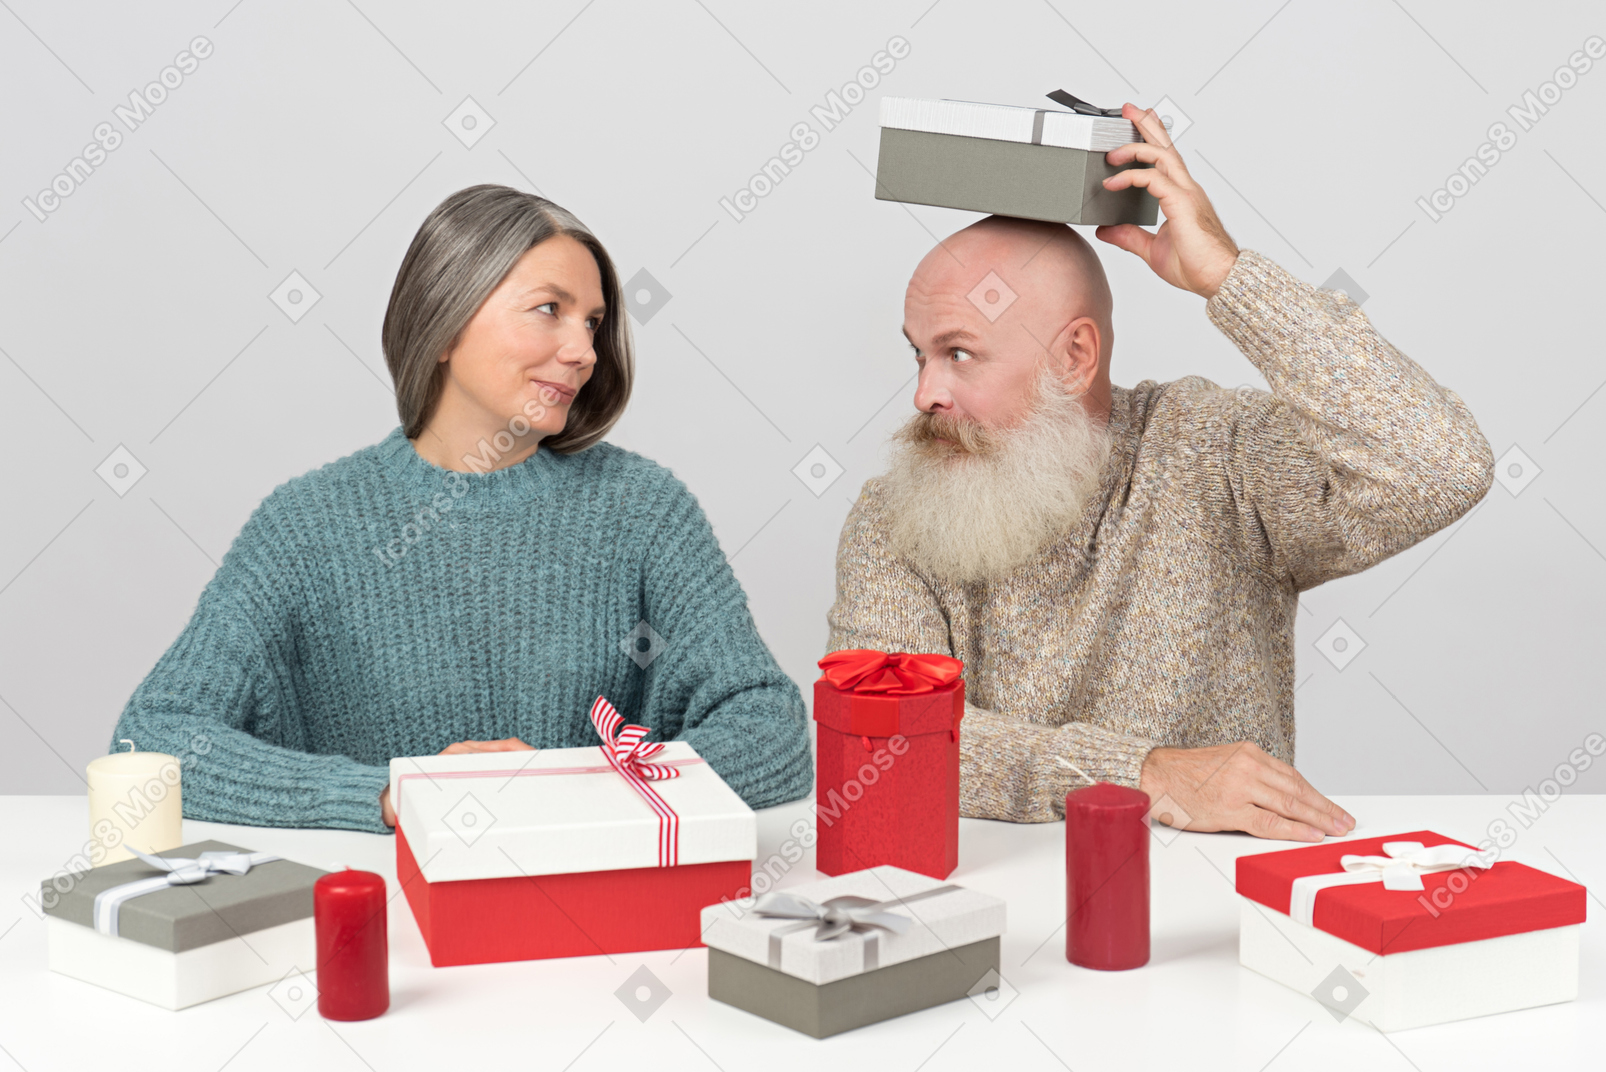 Elderly couple packing christmas gifts while husband is fooling around